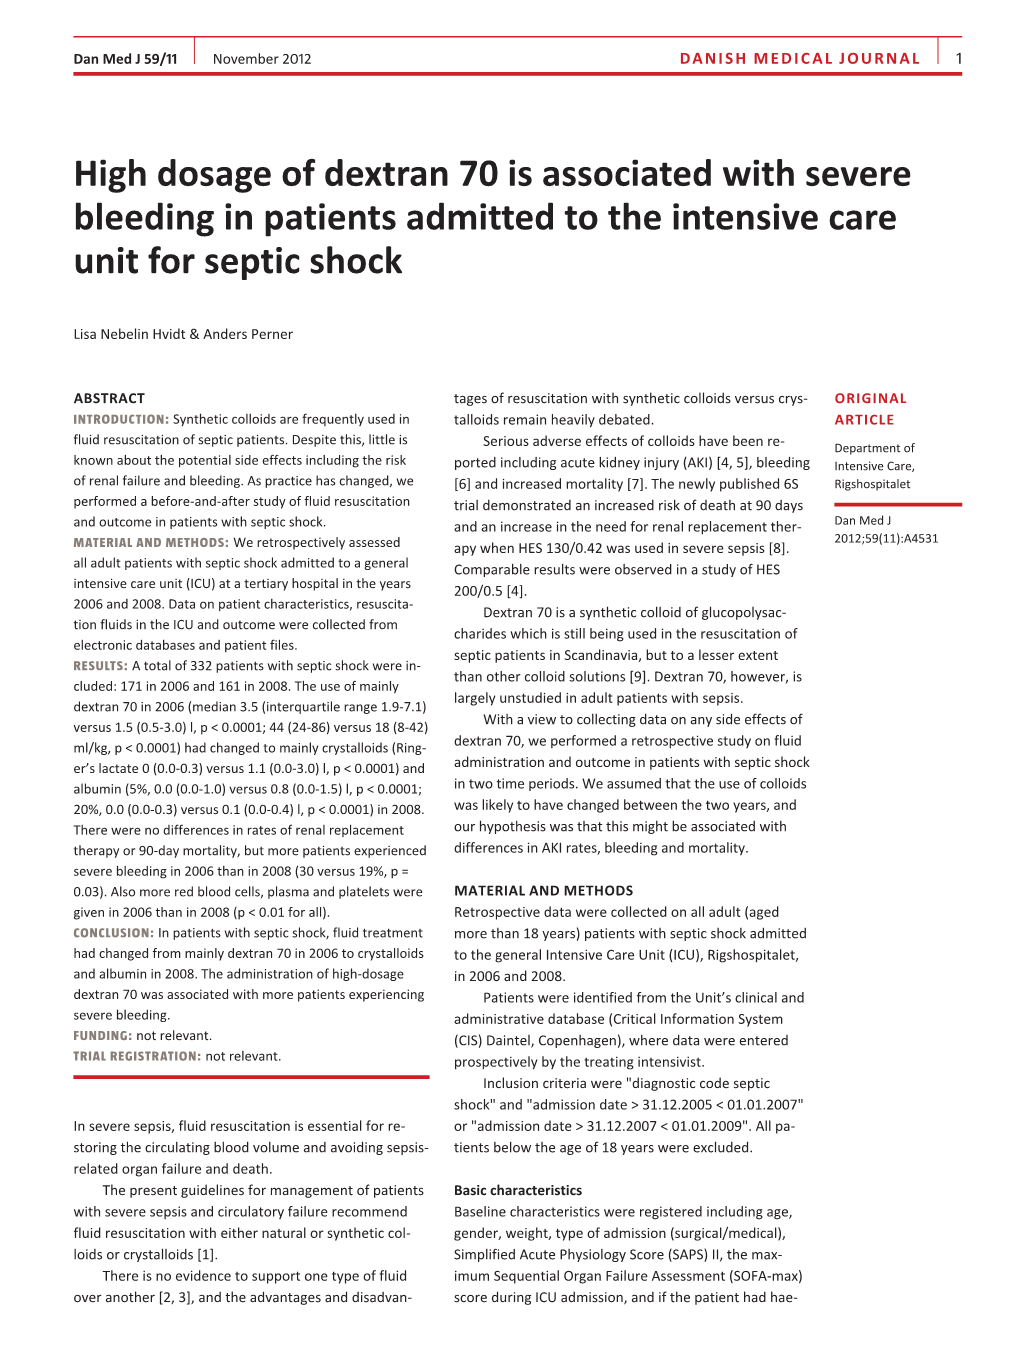 High Dosage of Dextran 70 Is Associated with Severe Bleeding in Patients Admitted to the Intensive Care Unit for Septic Shock